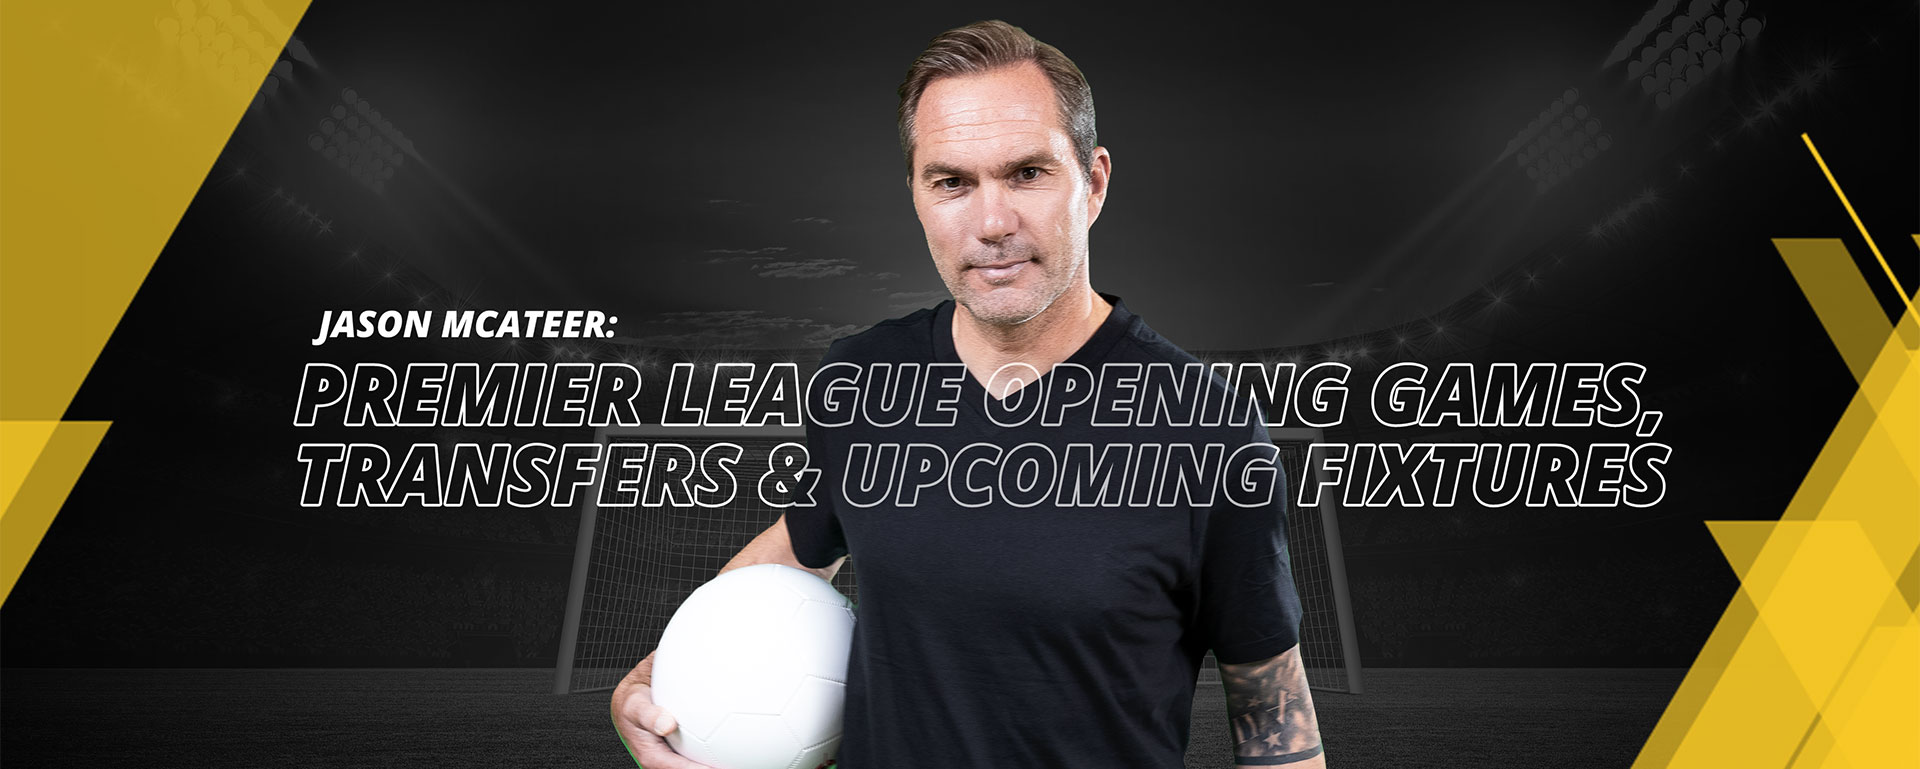 JASON MCATEER: OPENING GAMES, TRANSFERS AND MORE